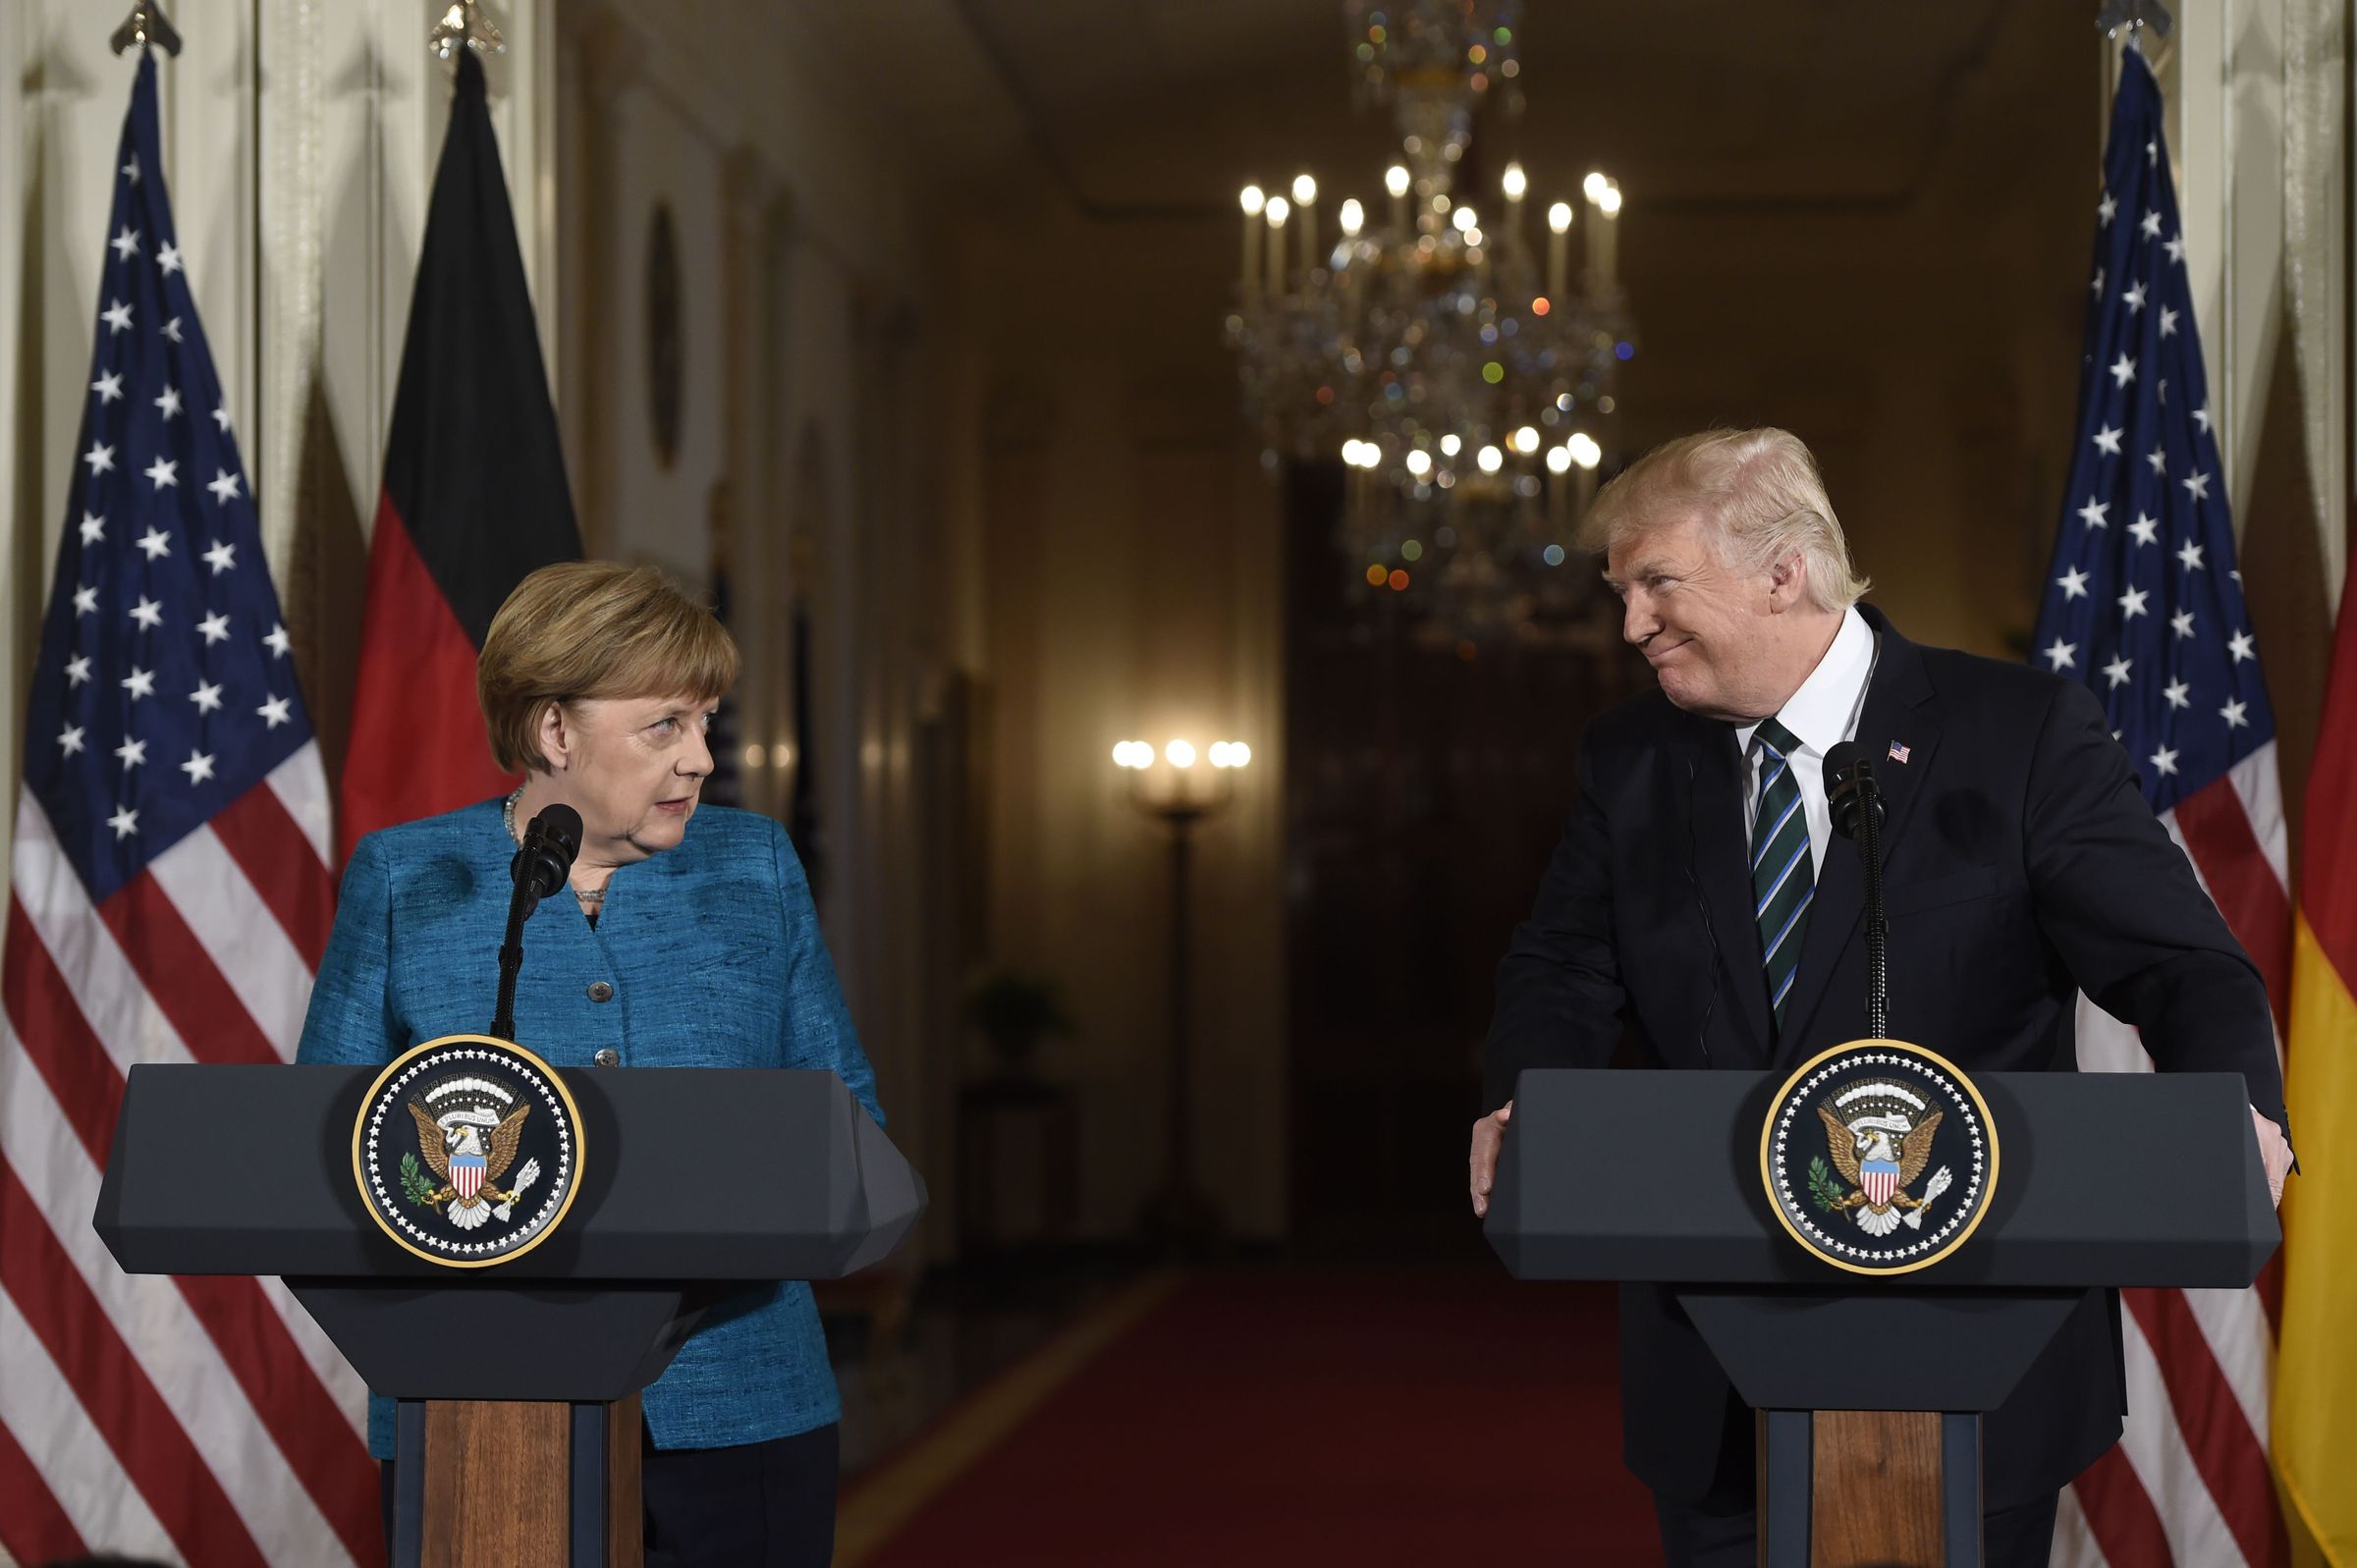 TOPSHOT - US President Donald Trump and German Chancellor Angela Merkel hold a joint press conference in the East Room of the White House in Washington, DC, on March 17, 2017. / AFP PHOTO / SAUL LOEB 